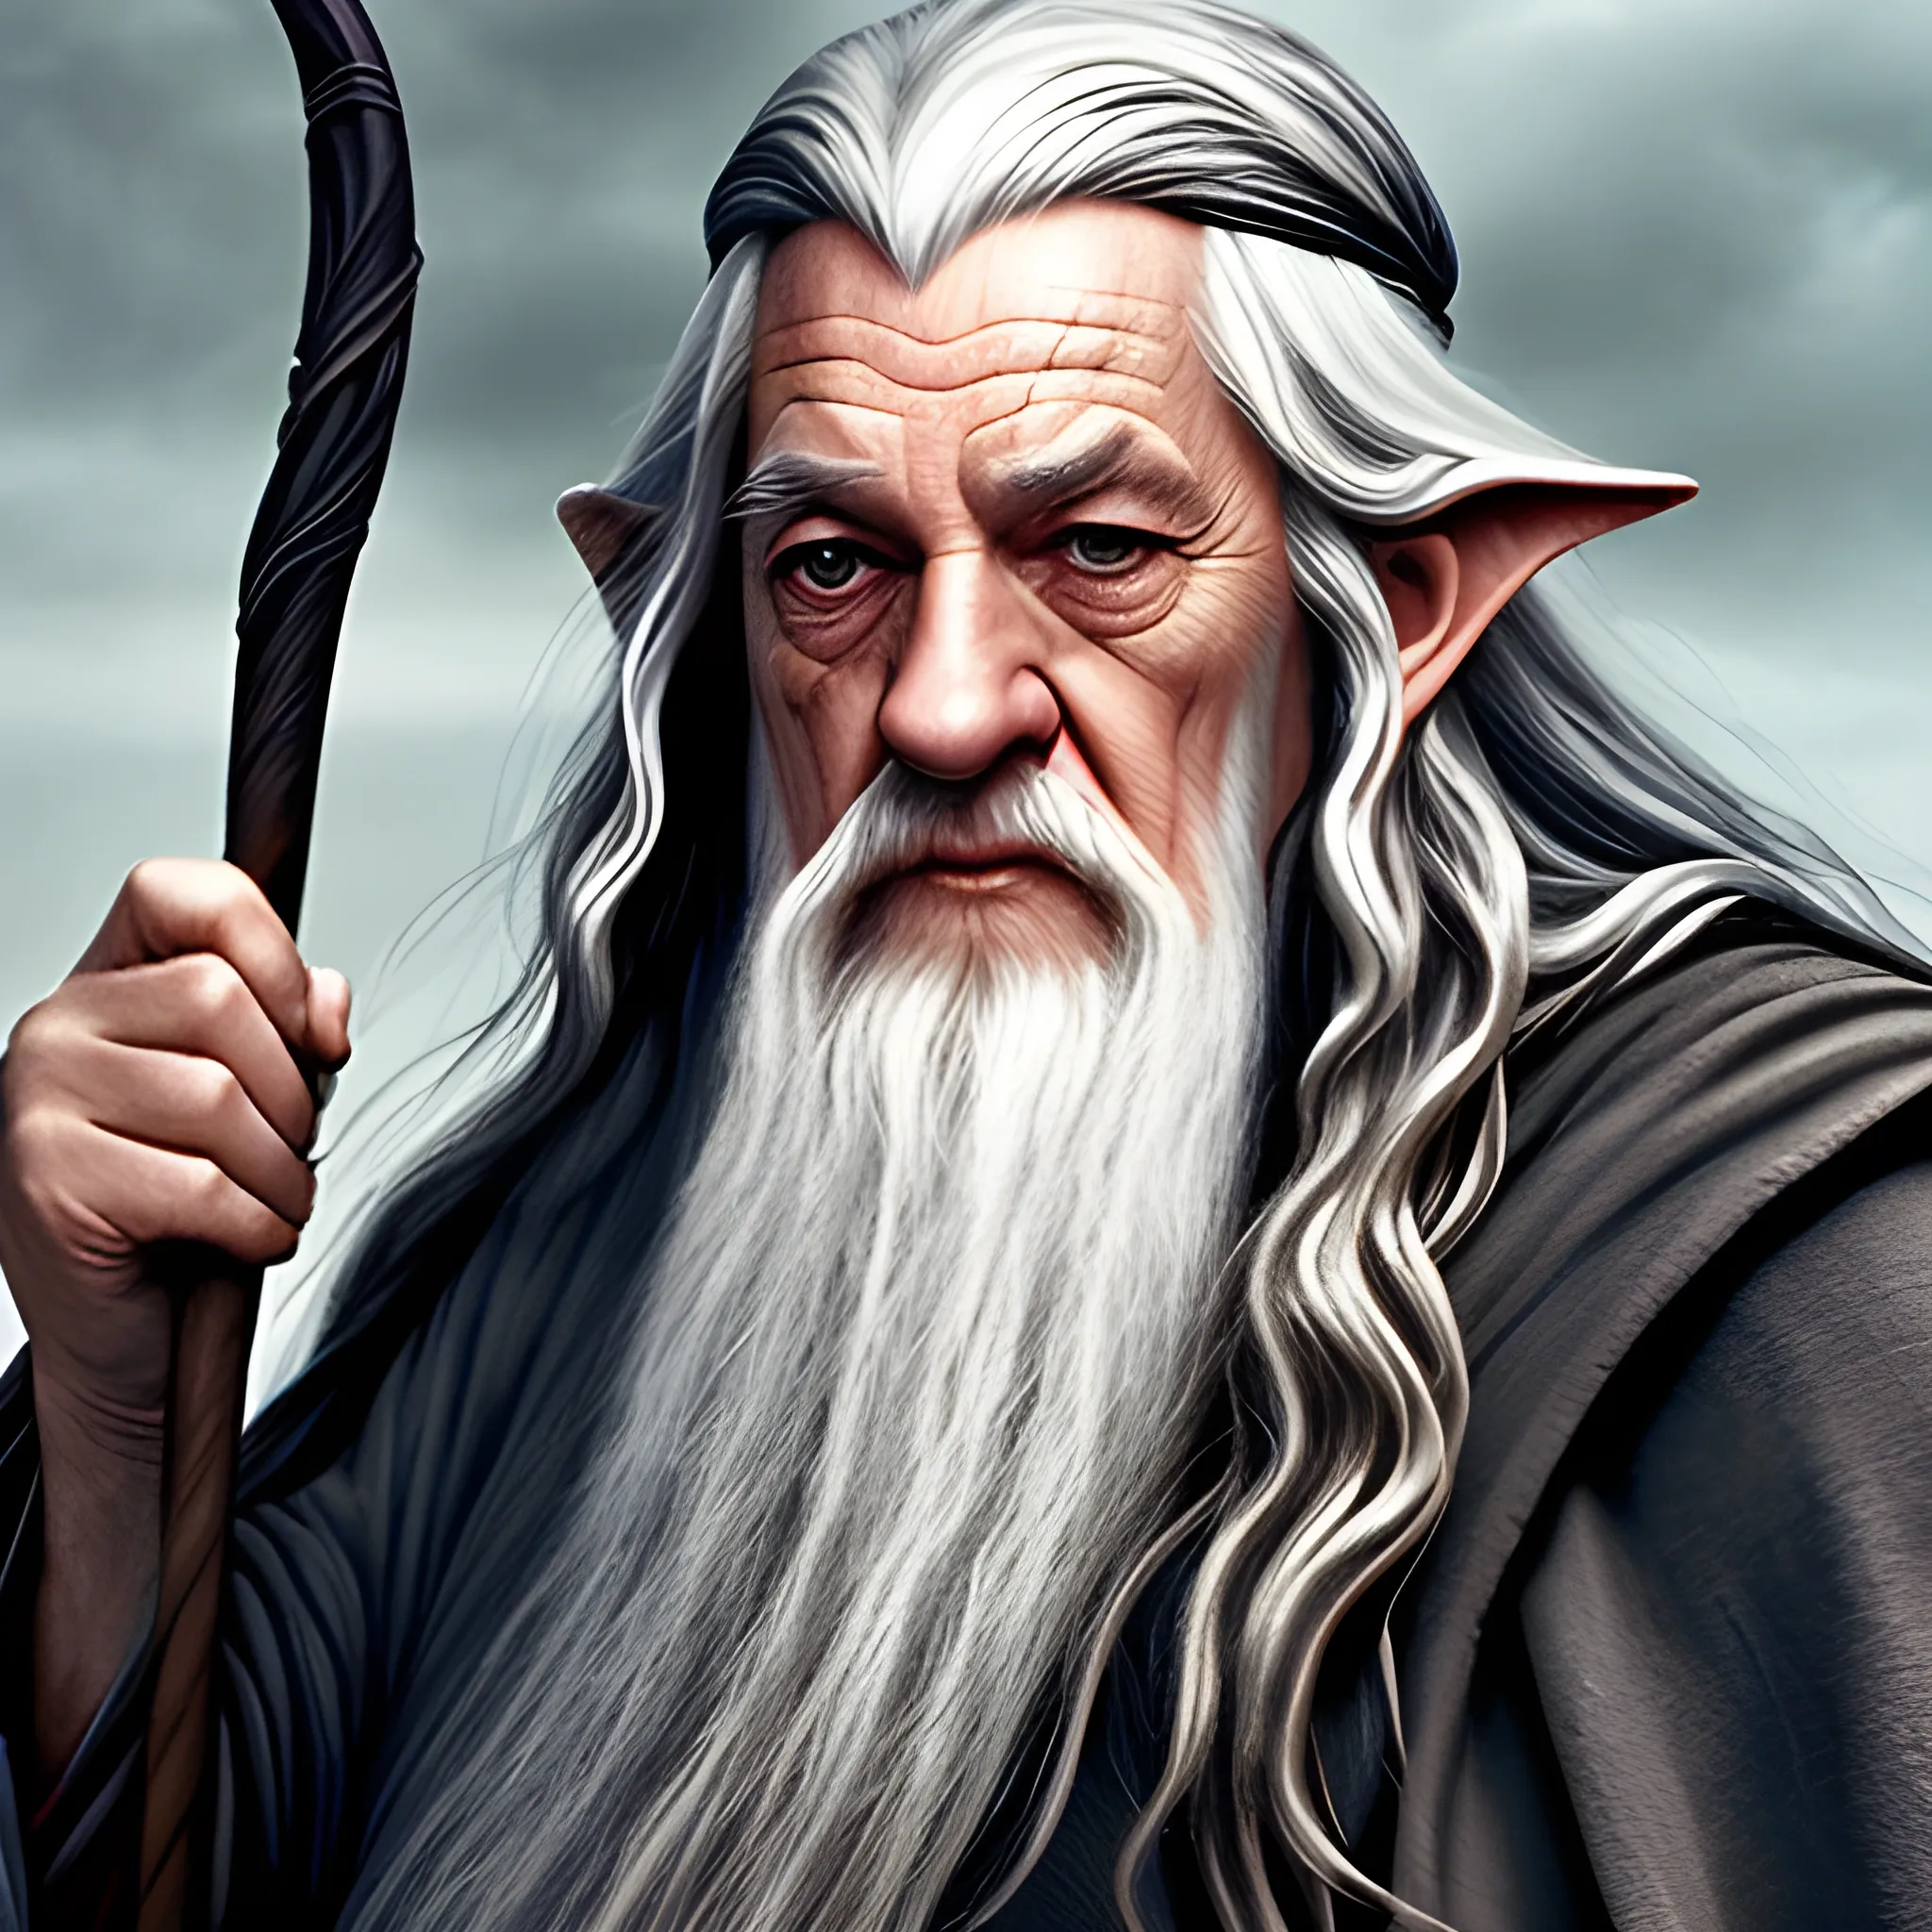 Give me Gandalf from lord of the rings but different
